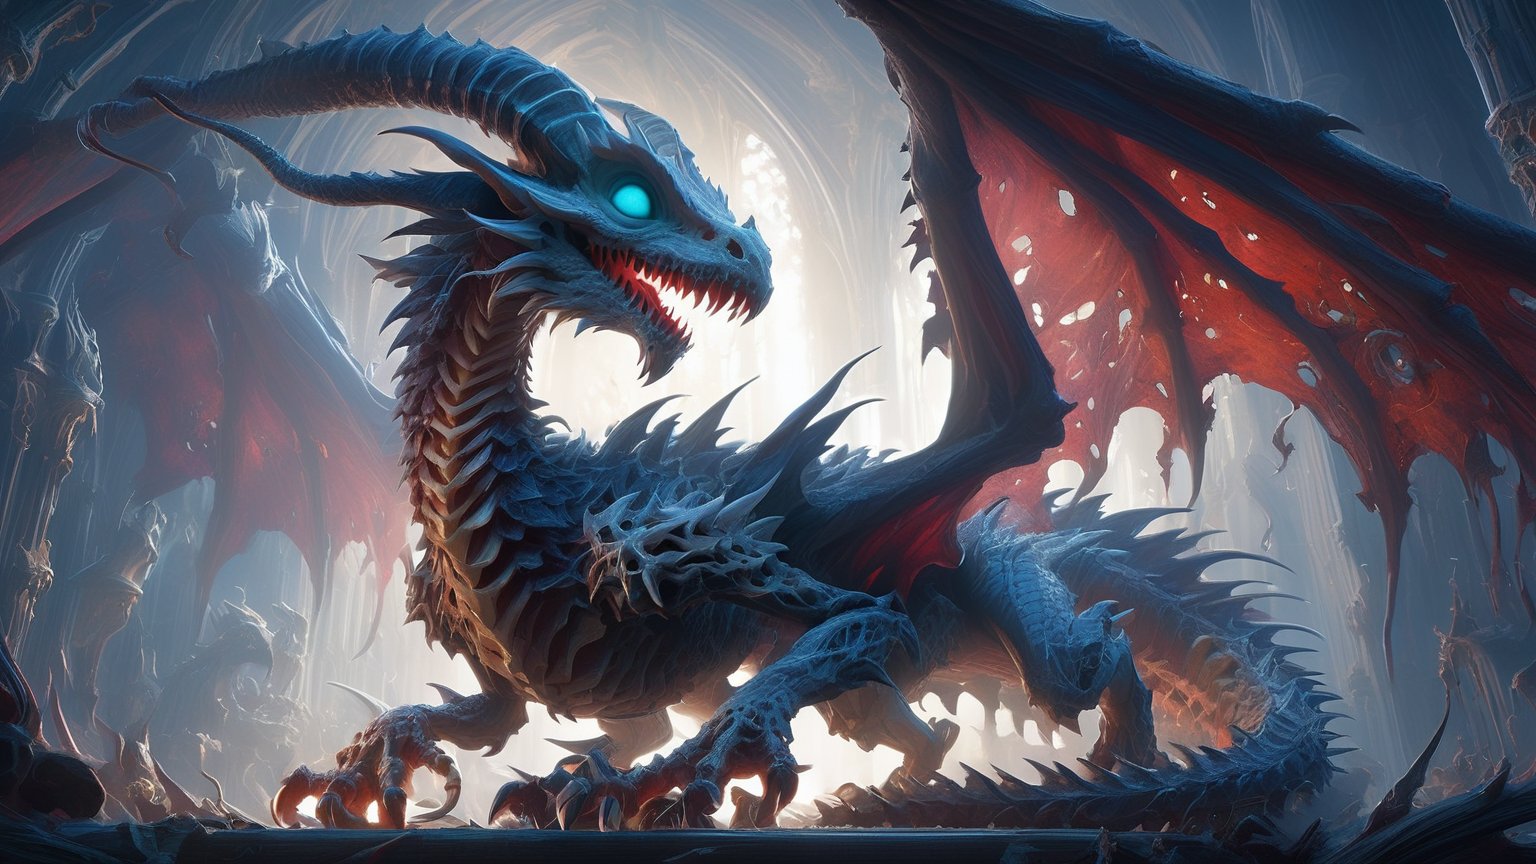 Ultra detailed illustration painting of a 1dracolich,  "a cute chibi baby dragon dracolich on navy bioluminescent galaxy,  exposed muscles and bone,  round skull-like head,  big sparkling eyes,  happy adorable horror creature,  dragon nest in an abandoned gothic cathedral",  detailed setting,  by marc simonetti and yoji shinkawa and wlop,  mark ryden,  chris ryniak,  todd lockwood,  chris rallis,  dynamic pose,  intricate details,  concept art,  extremely detailed,  cinematic,  stunning visual masterpiece, DracolichXL24, disney pixar style, glitter,<lora:EMS-280852-EMS:0.800000>